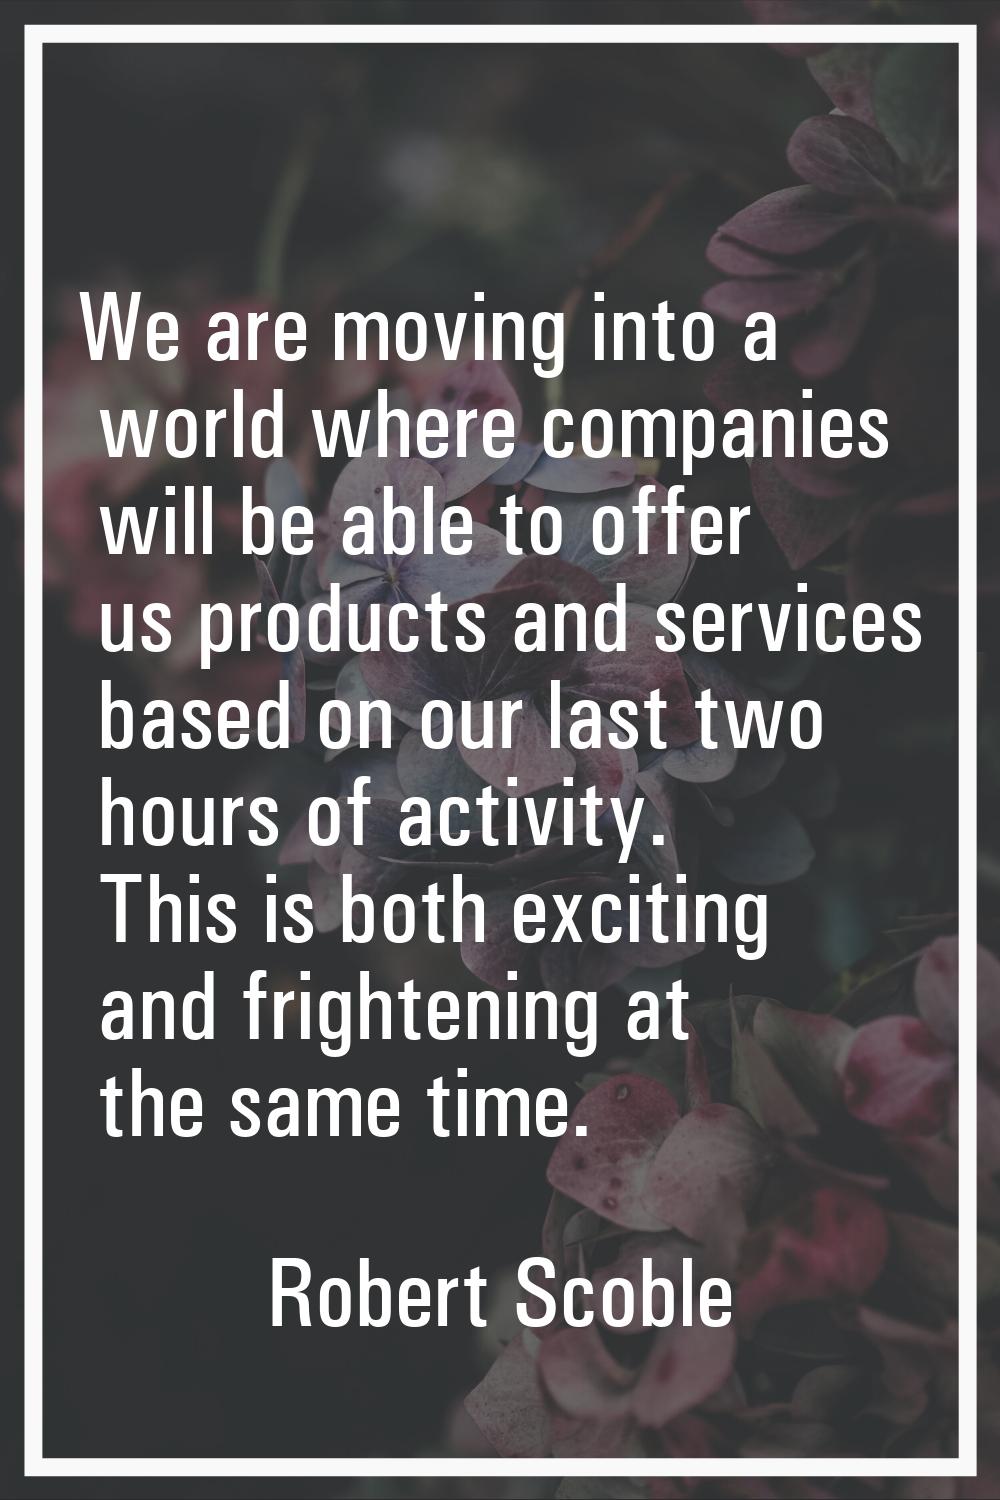 We are moving into a world where companies will be able to offer us products and services based on 